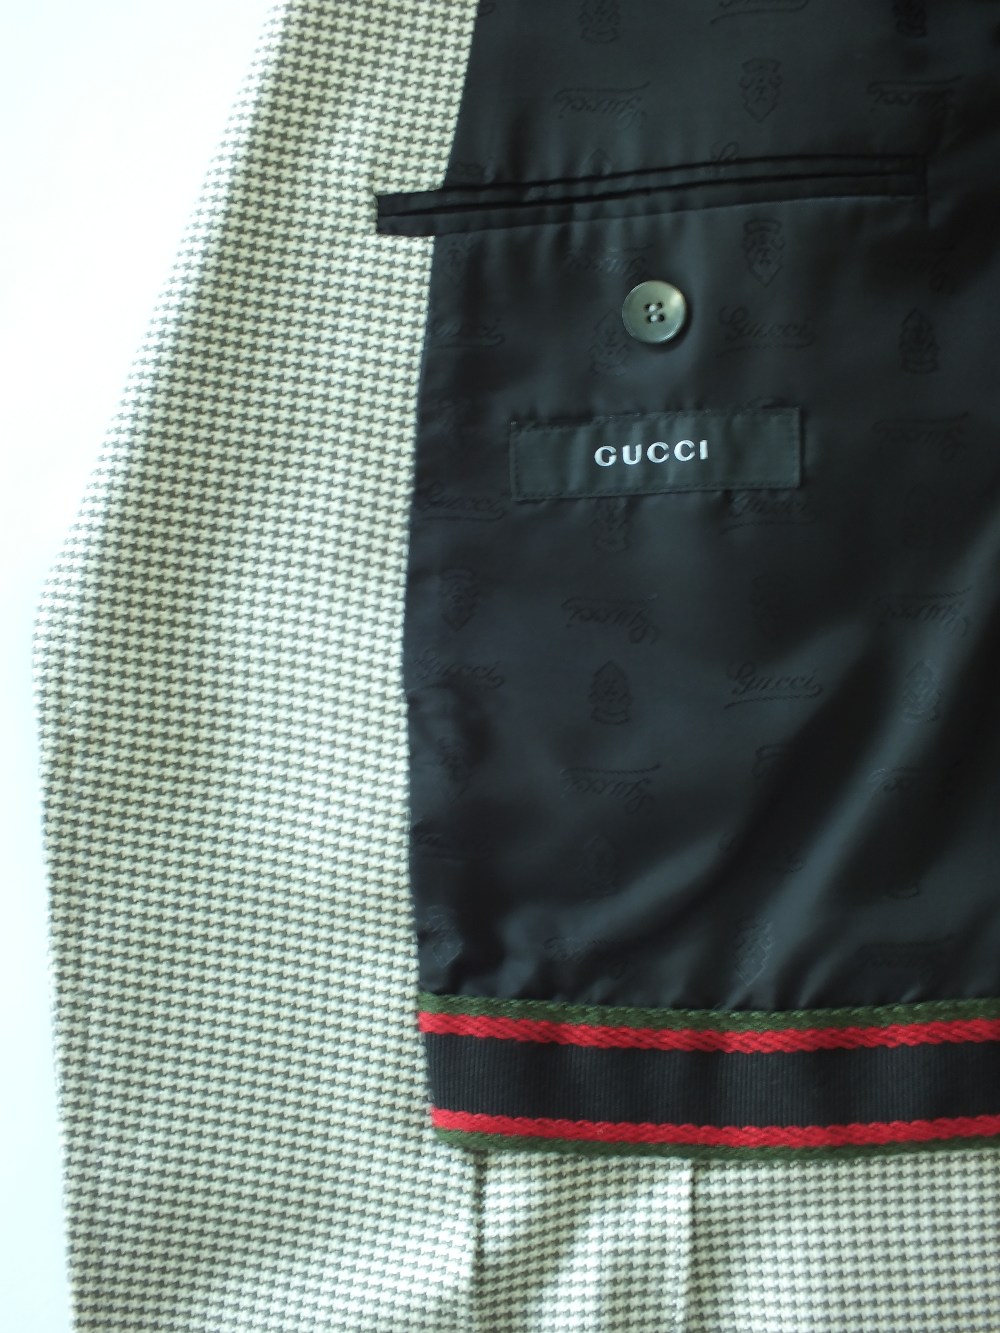 A Gucci sports jacket, mid grey dogs tooth check, patch breast pocket, single vent, half lined in - Image 7 of 7